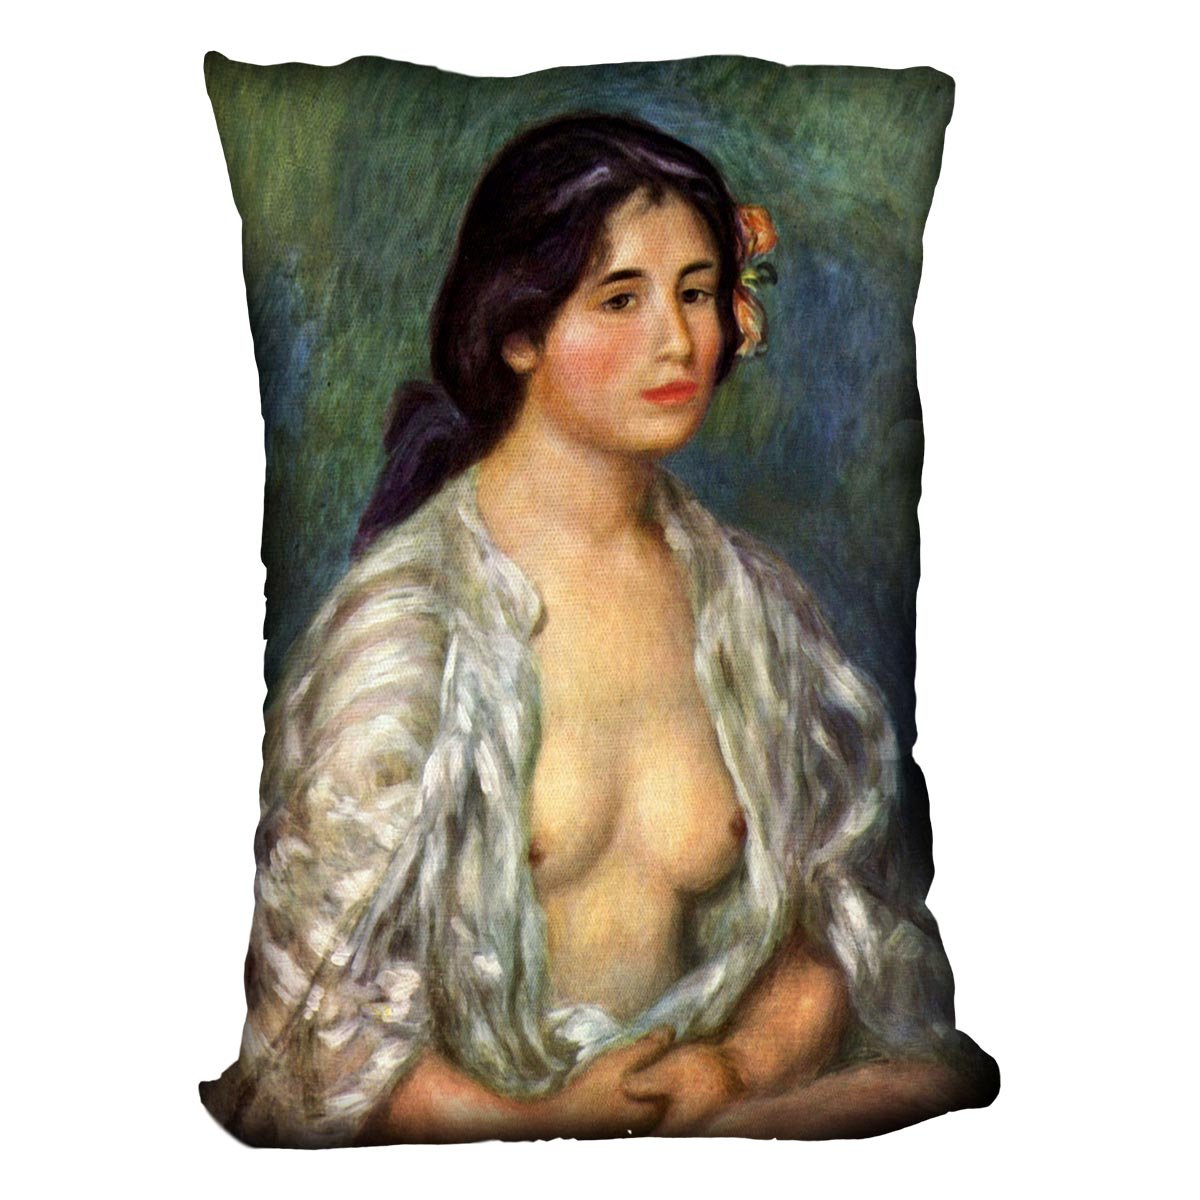 Gabrielle with open blouse by Renoir Throw Pillow